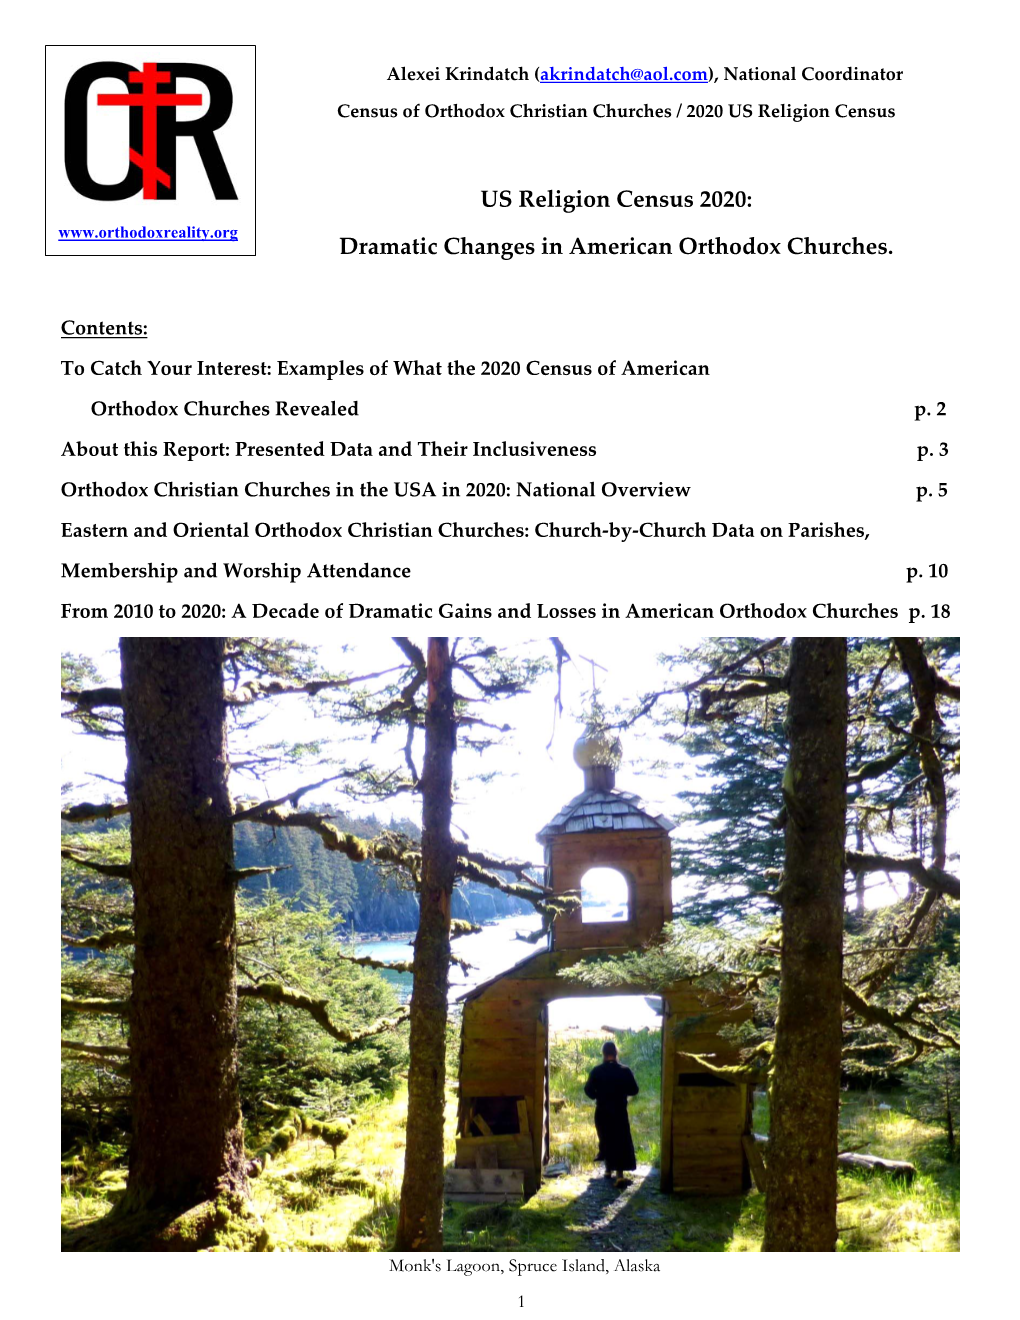 US Religion Census 2020: Dramatic Changes in American Orthodox Churches